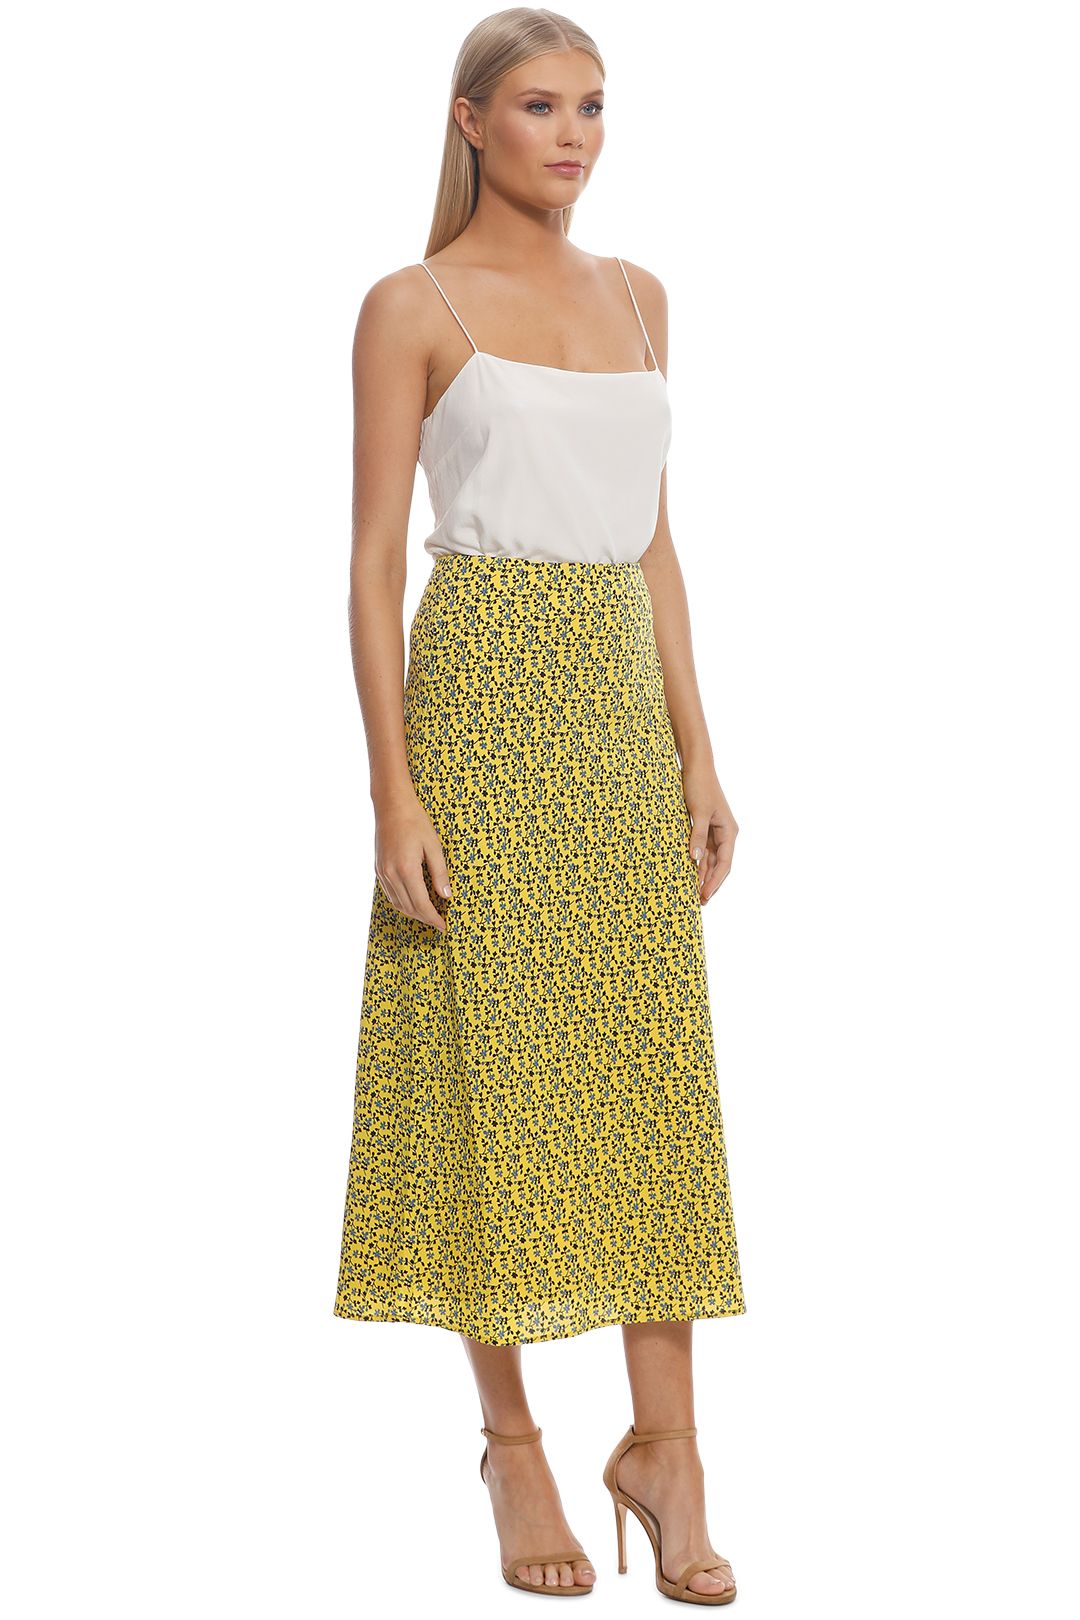 CMEO Collective - Sanguine Skirt - Yellow Floral - Side